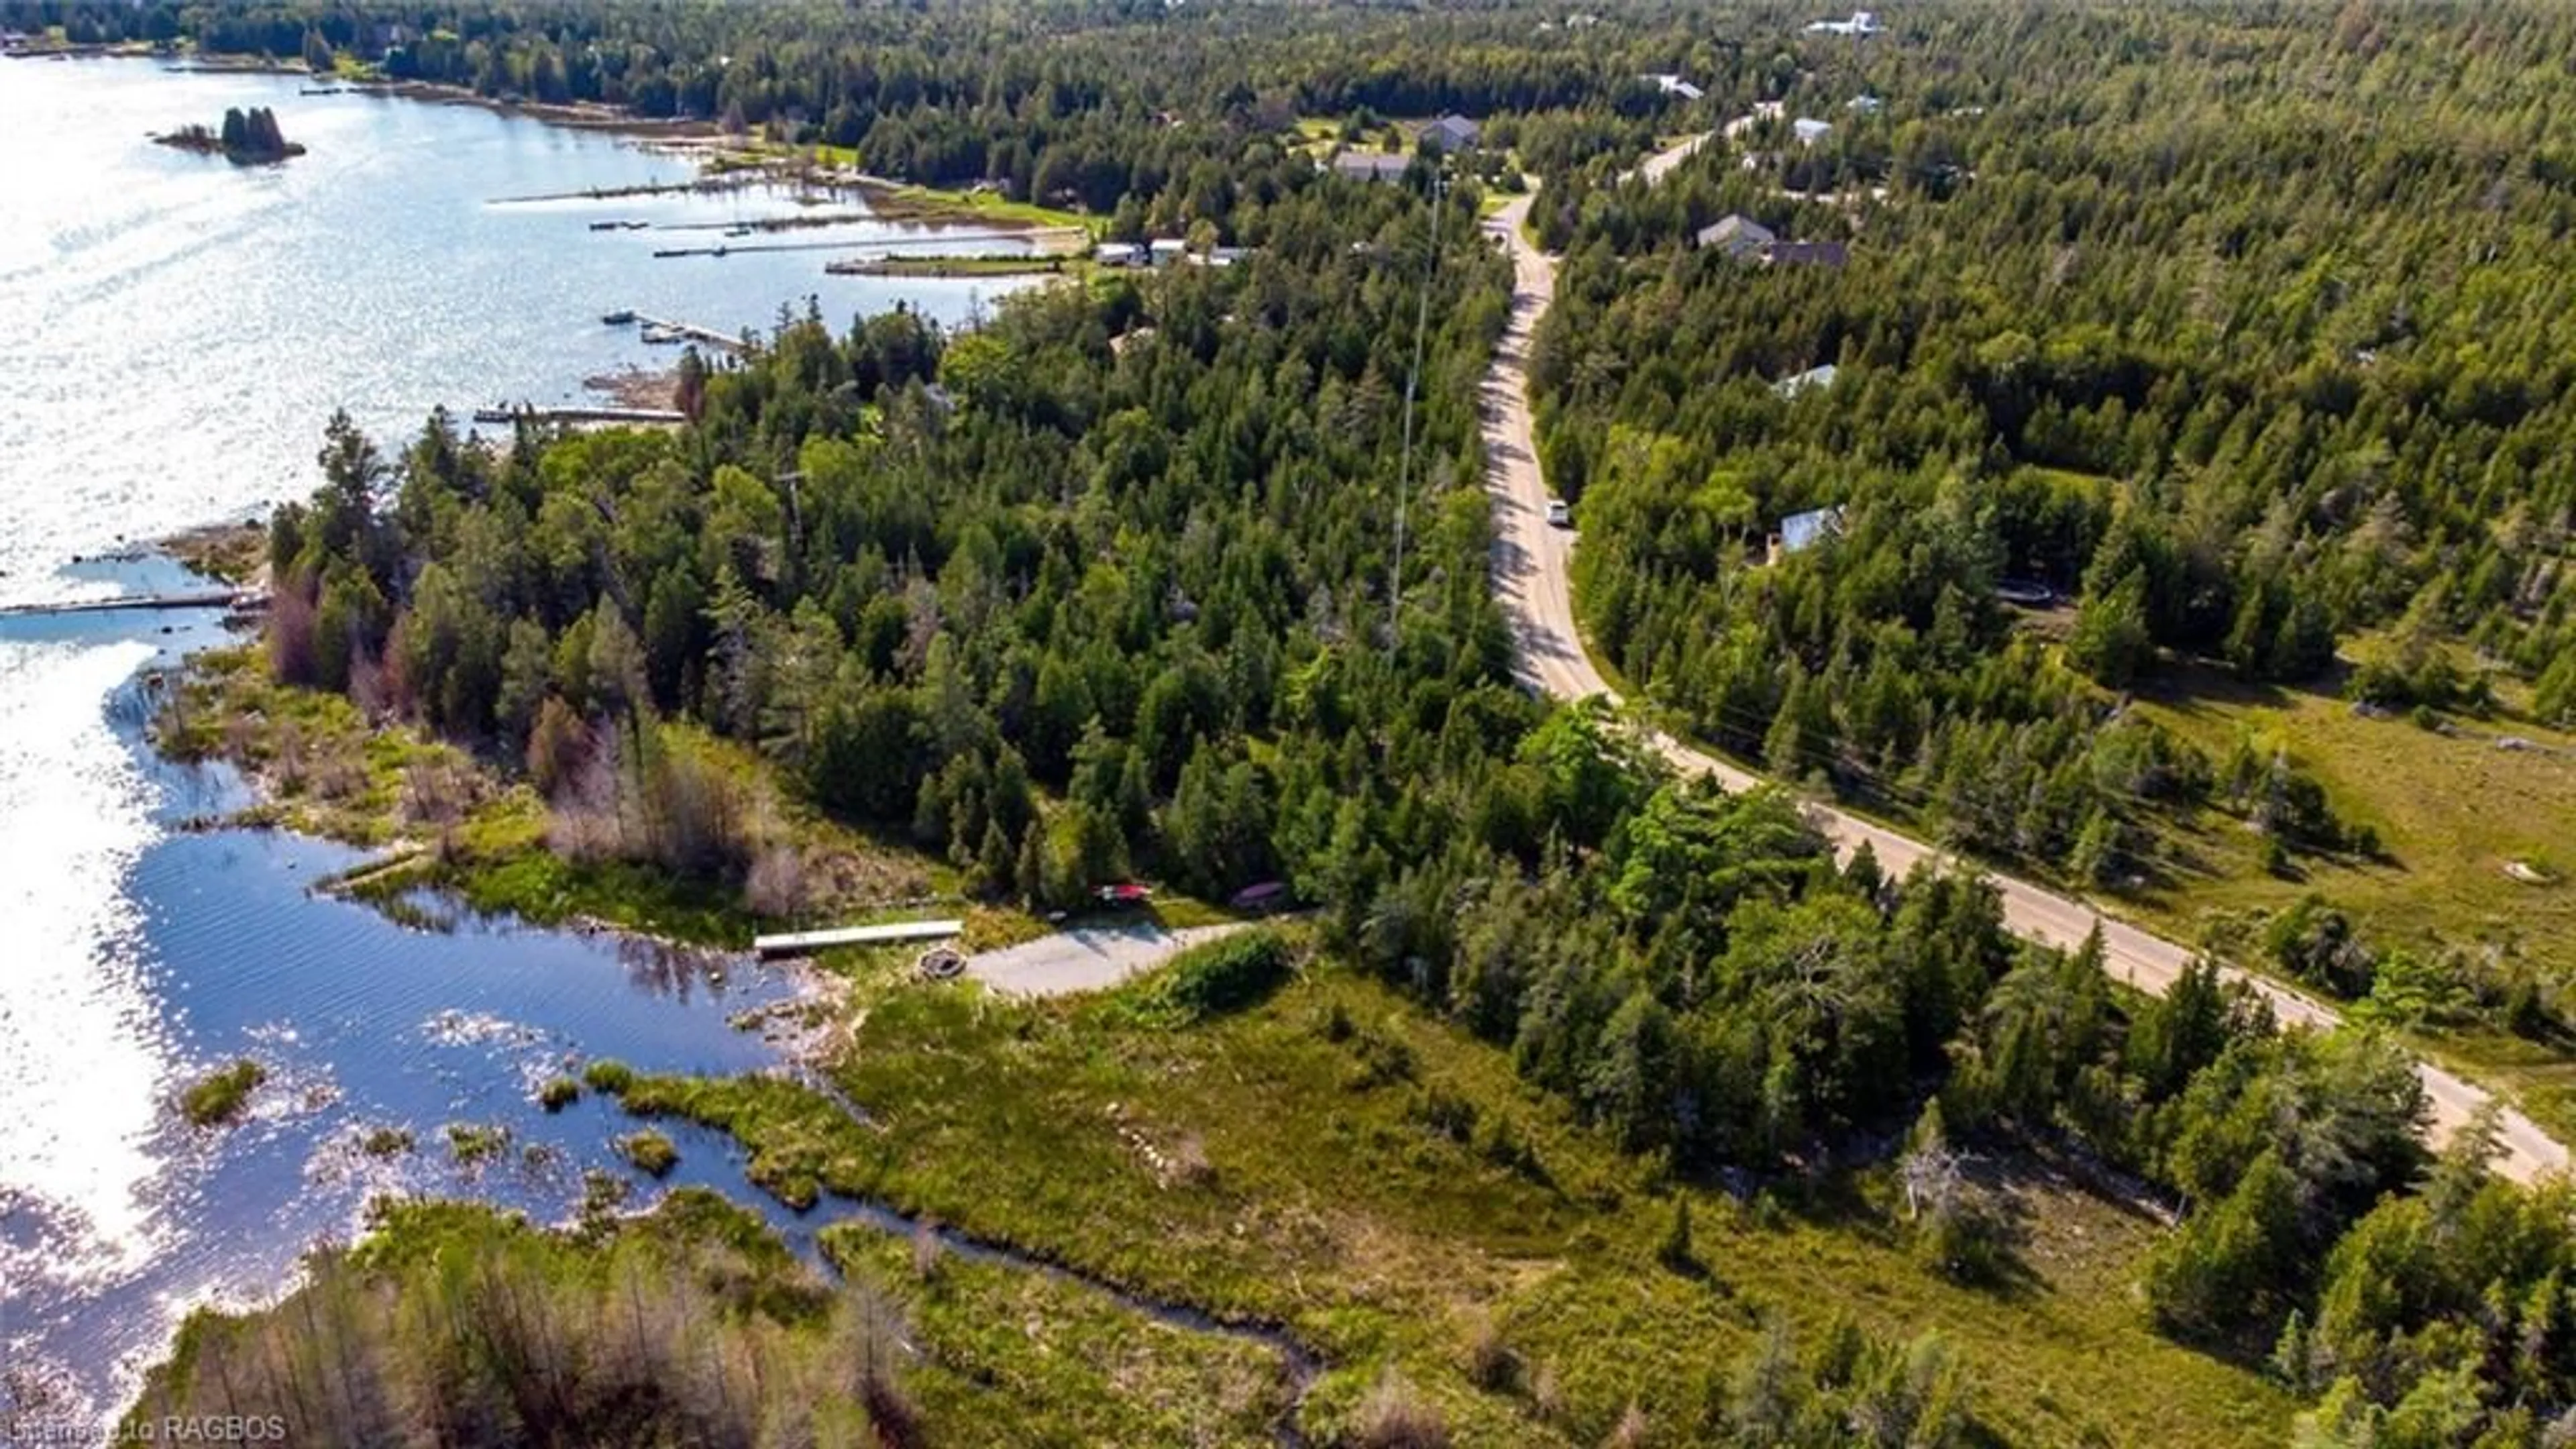 Lakeview for PT LT 30 CON 7 Old Pine Tree Rd, Northern Bruce Peninsula Ontario N0H 1Z0